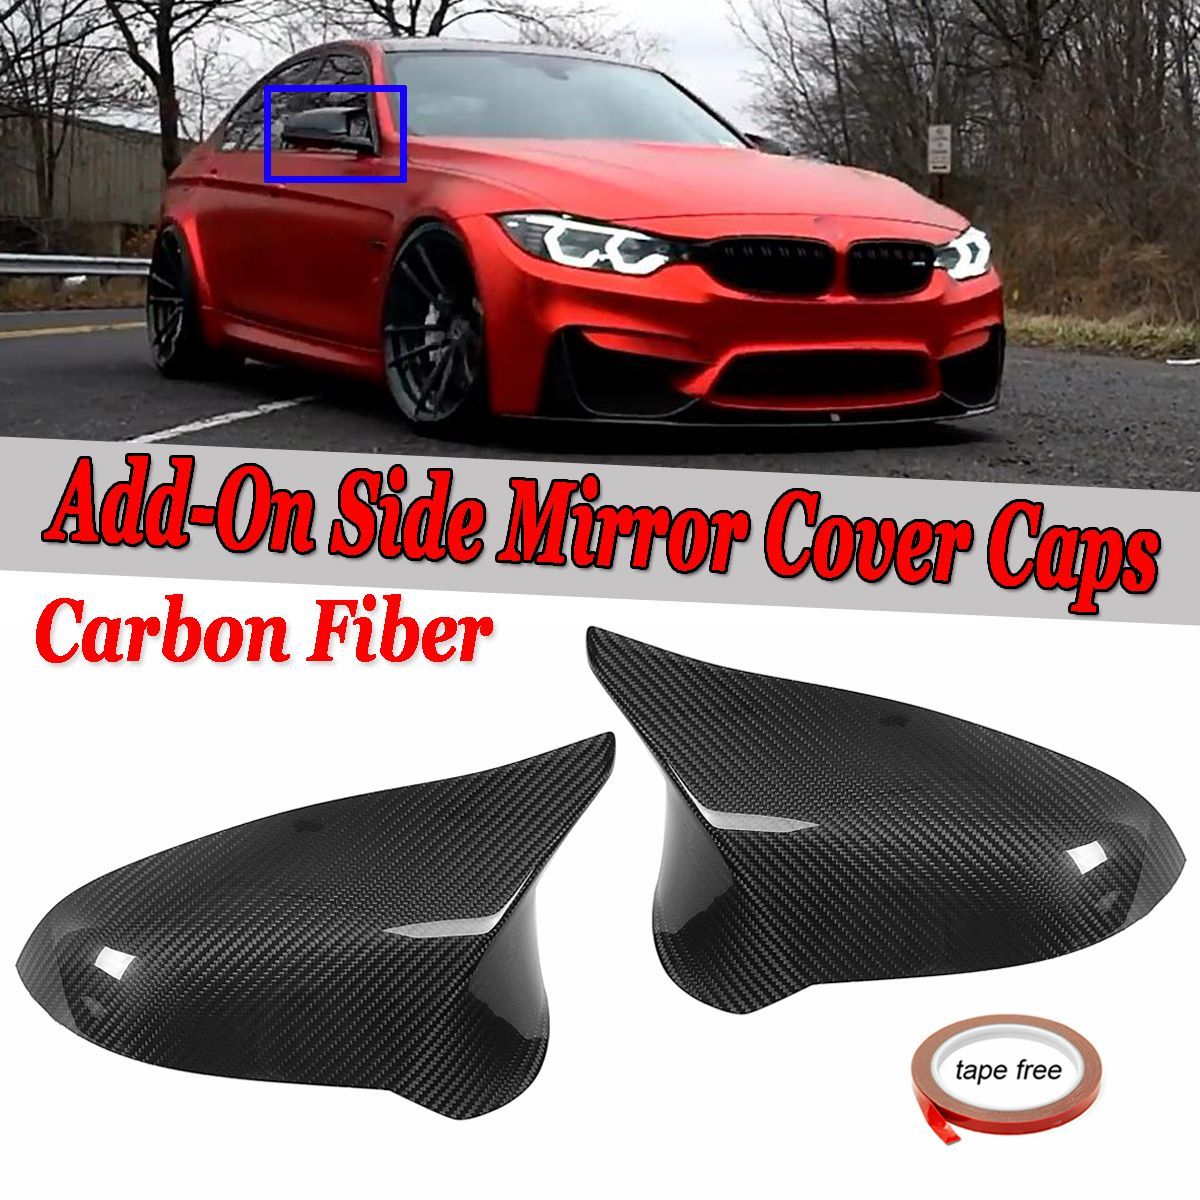 Right-Hand-Side-Performance-Style-Carbon-Fiber-Side-Car-Mirror-Cover-Caps-For-BMW-2015-2018-F82-M4-1382889